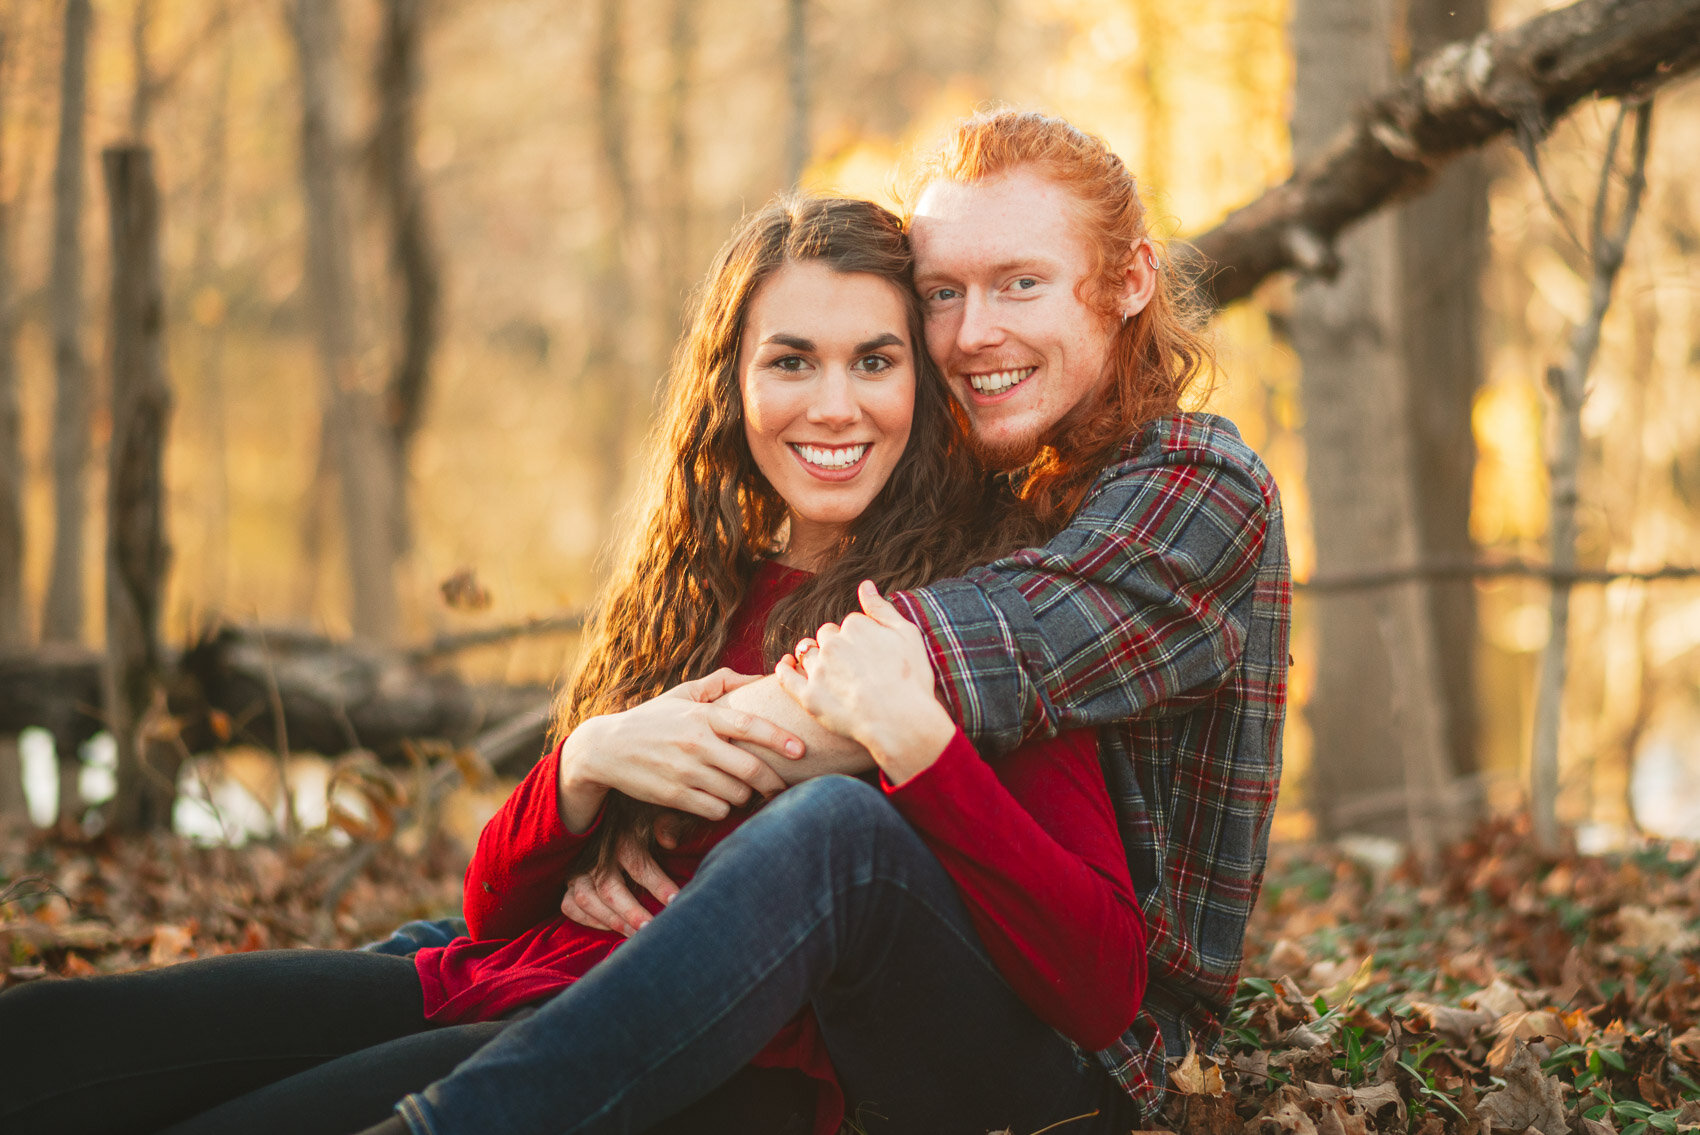 greenville illinois engagement session moses and emily-8.jpg